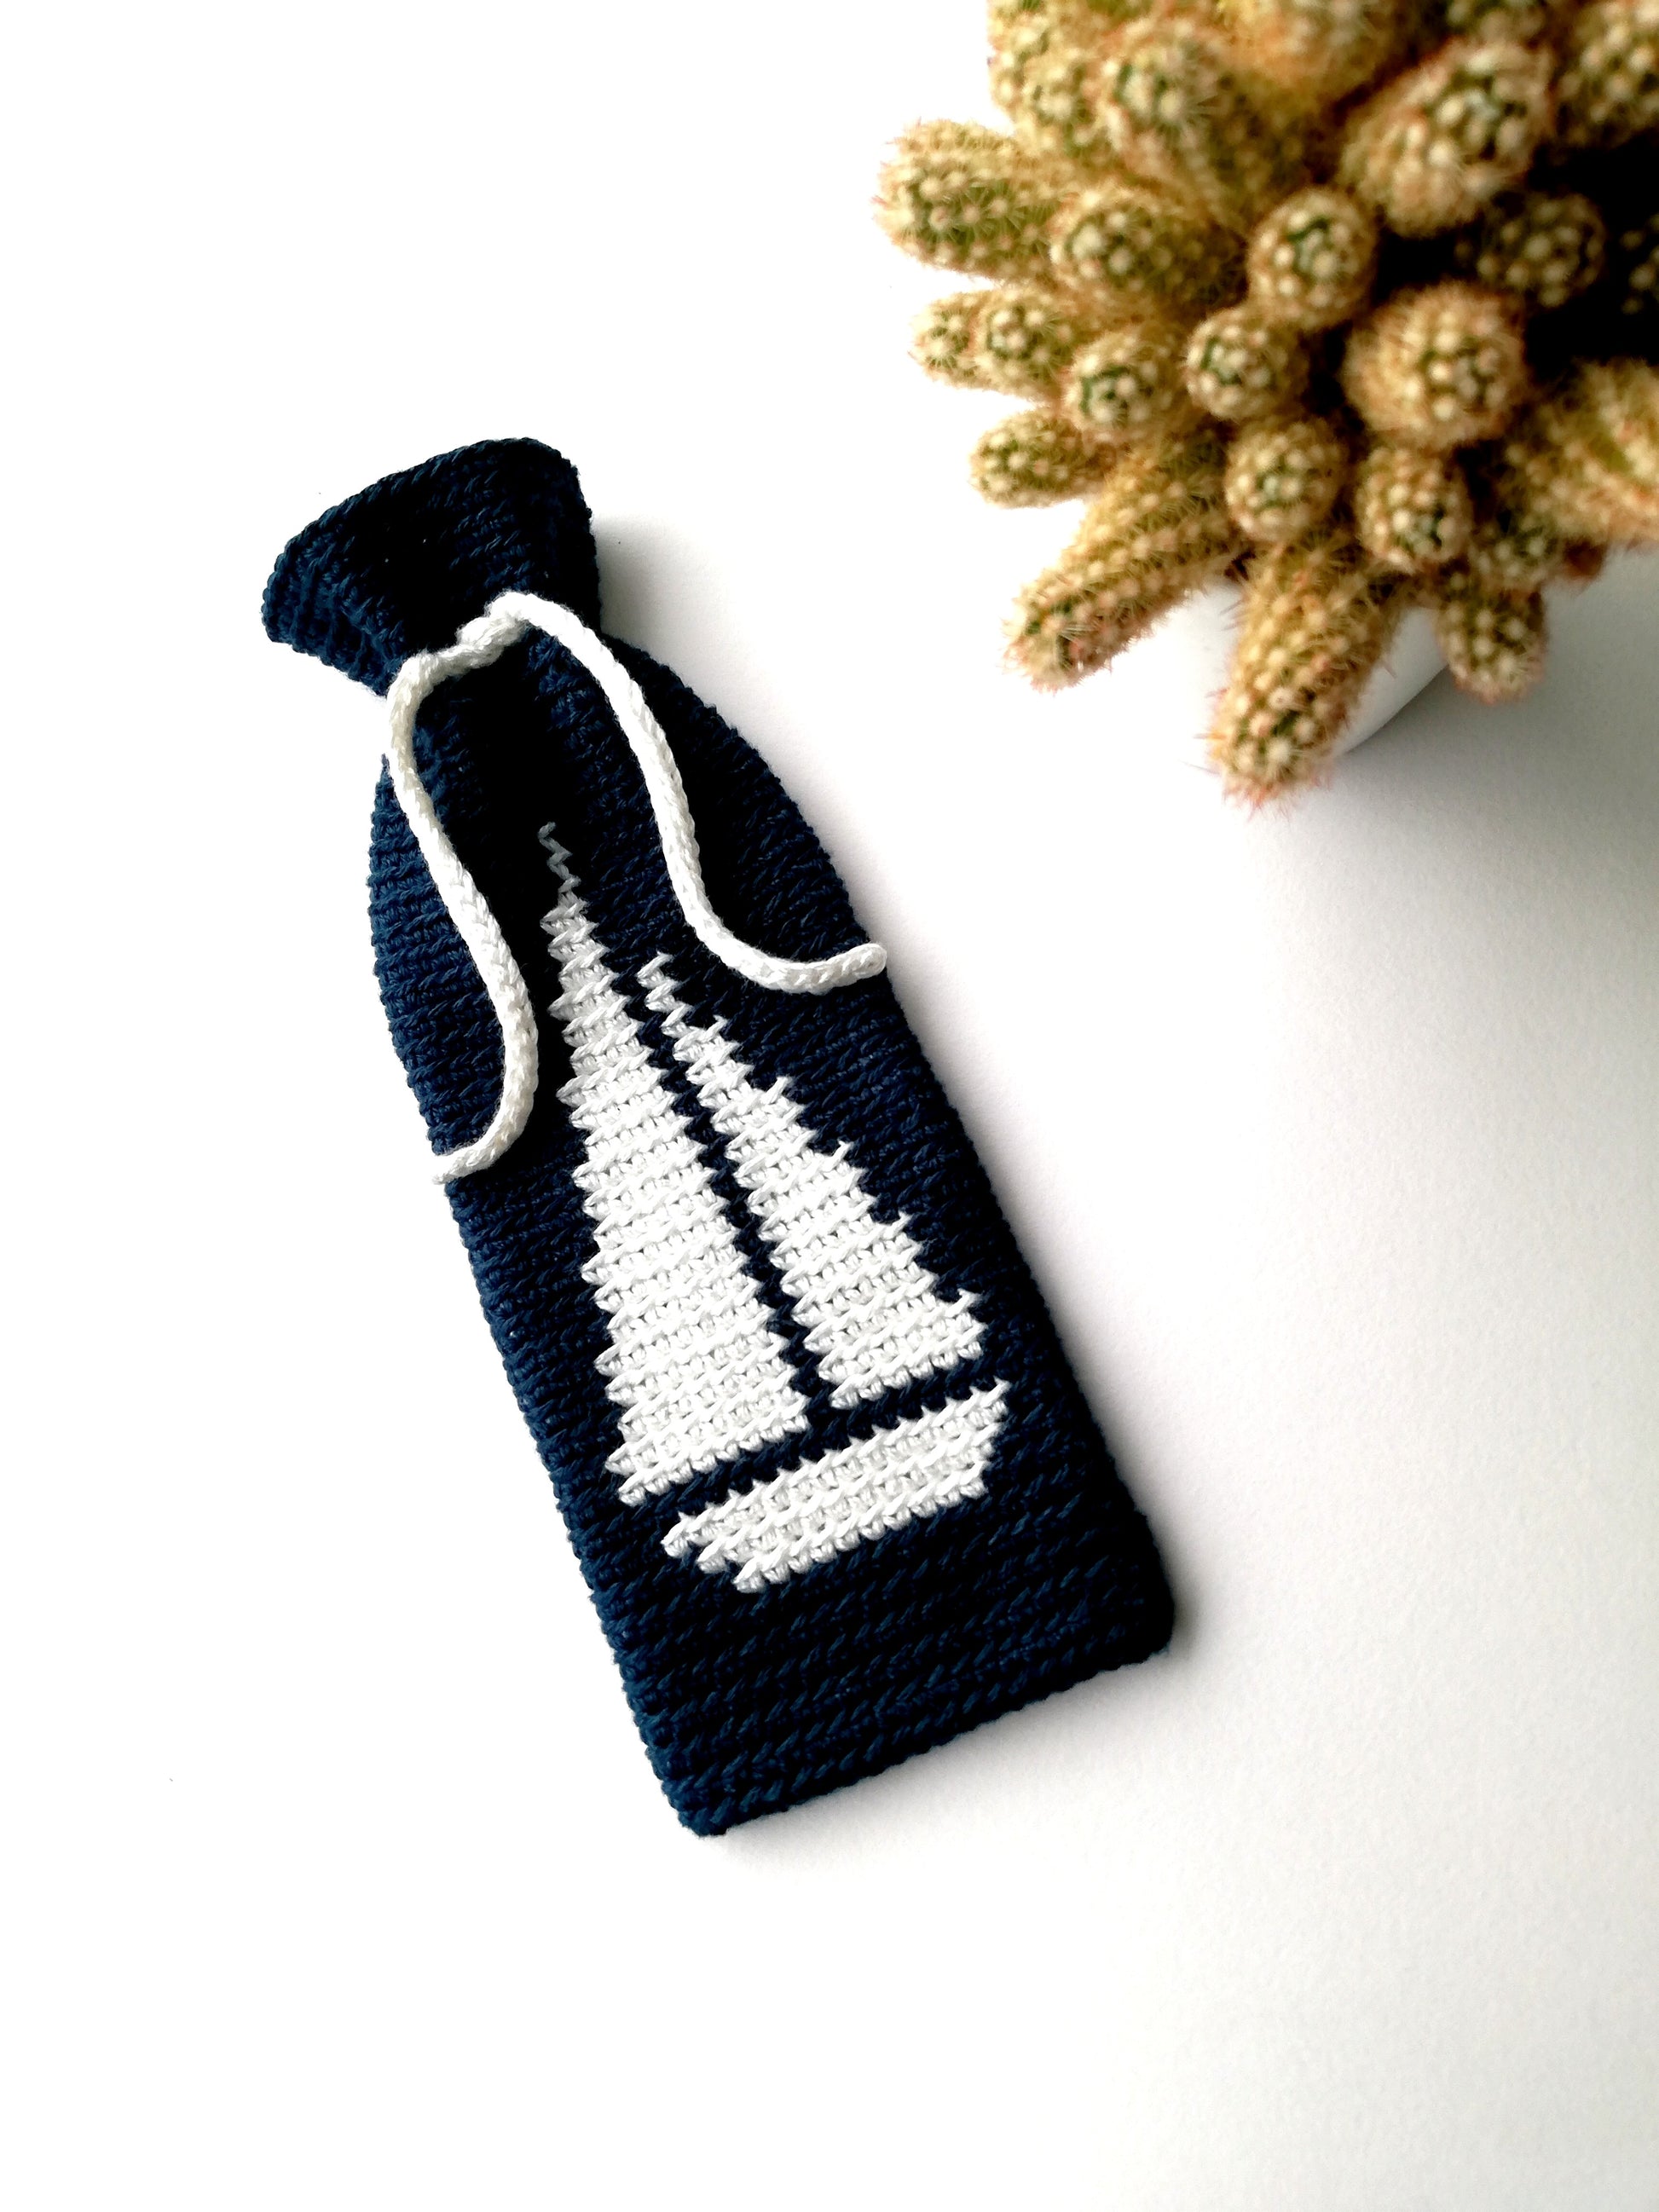 Tapestry crochet bag with a sailboat